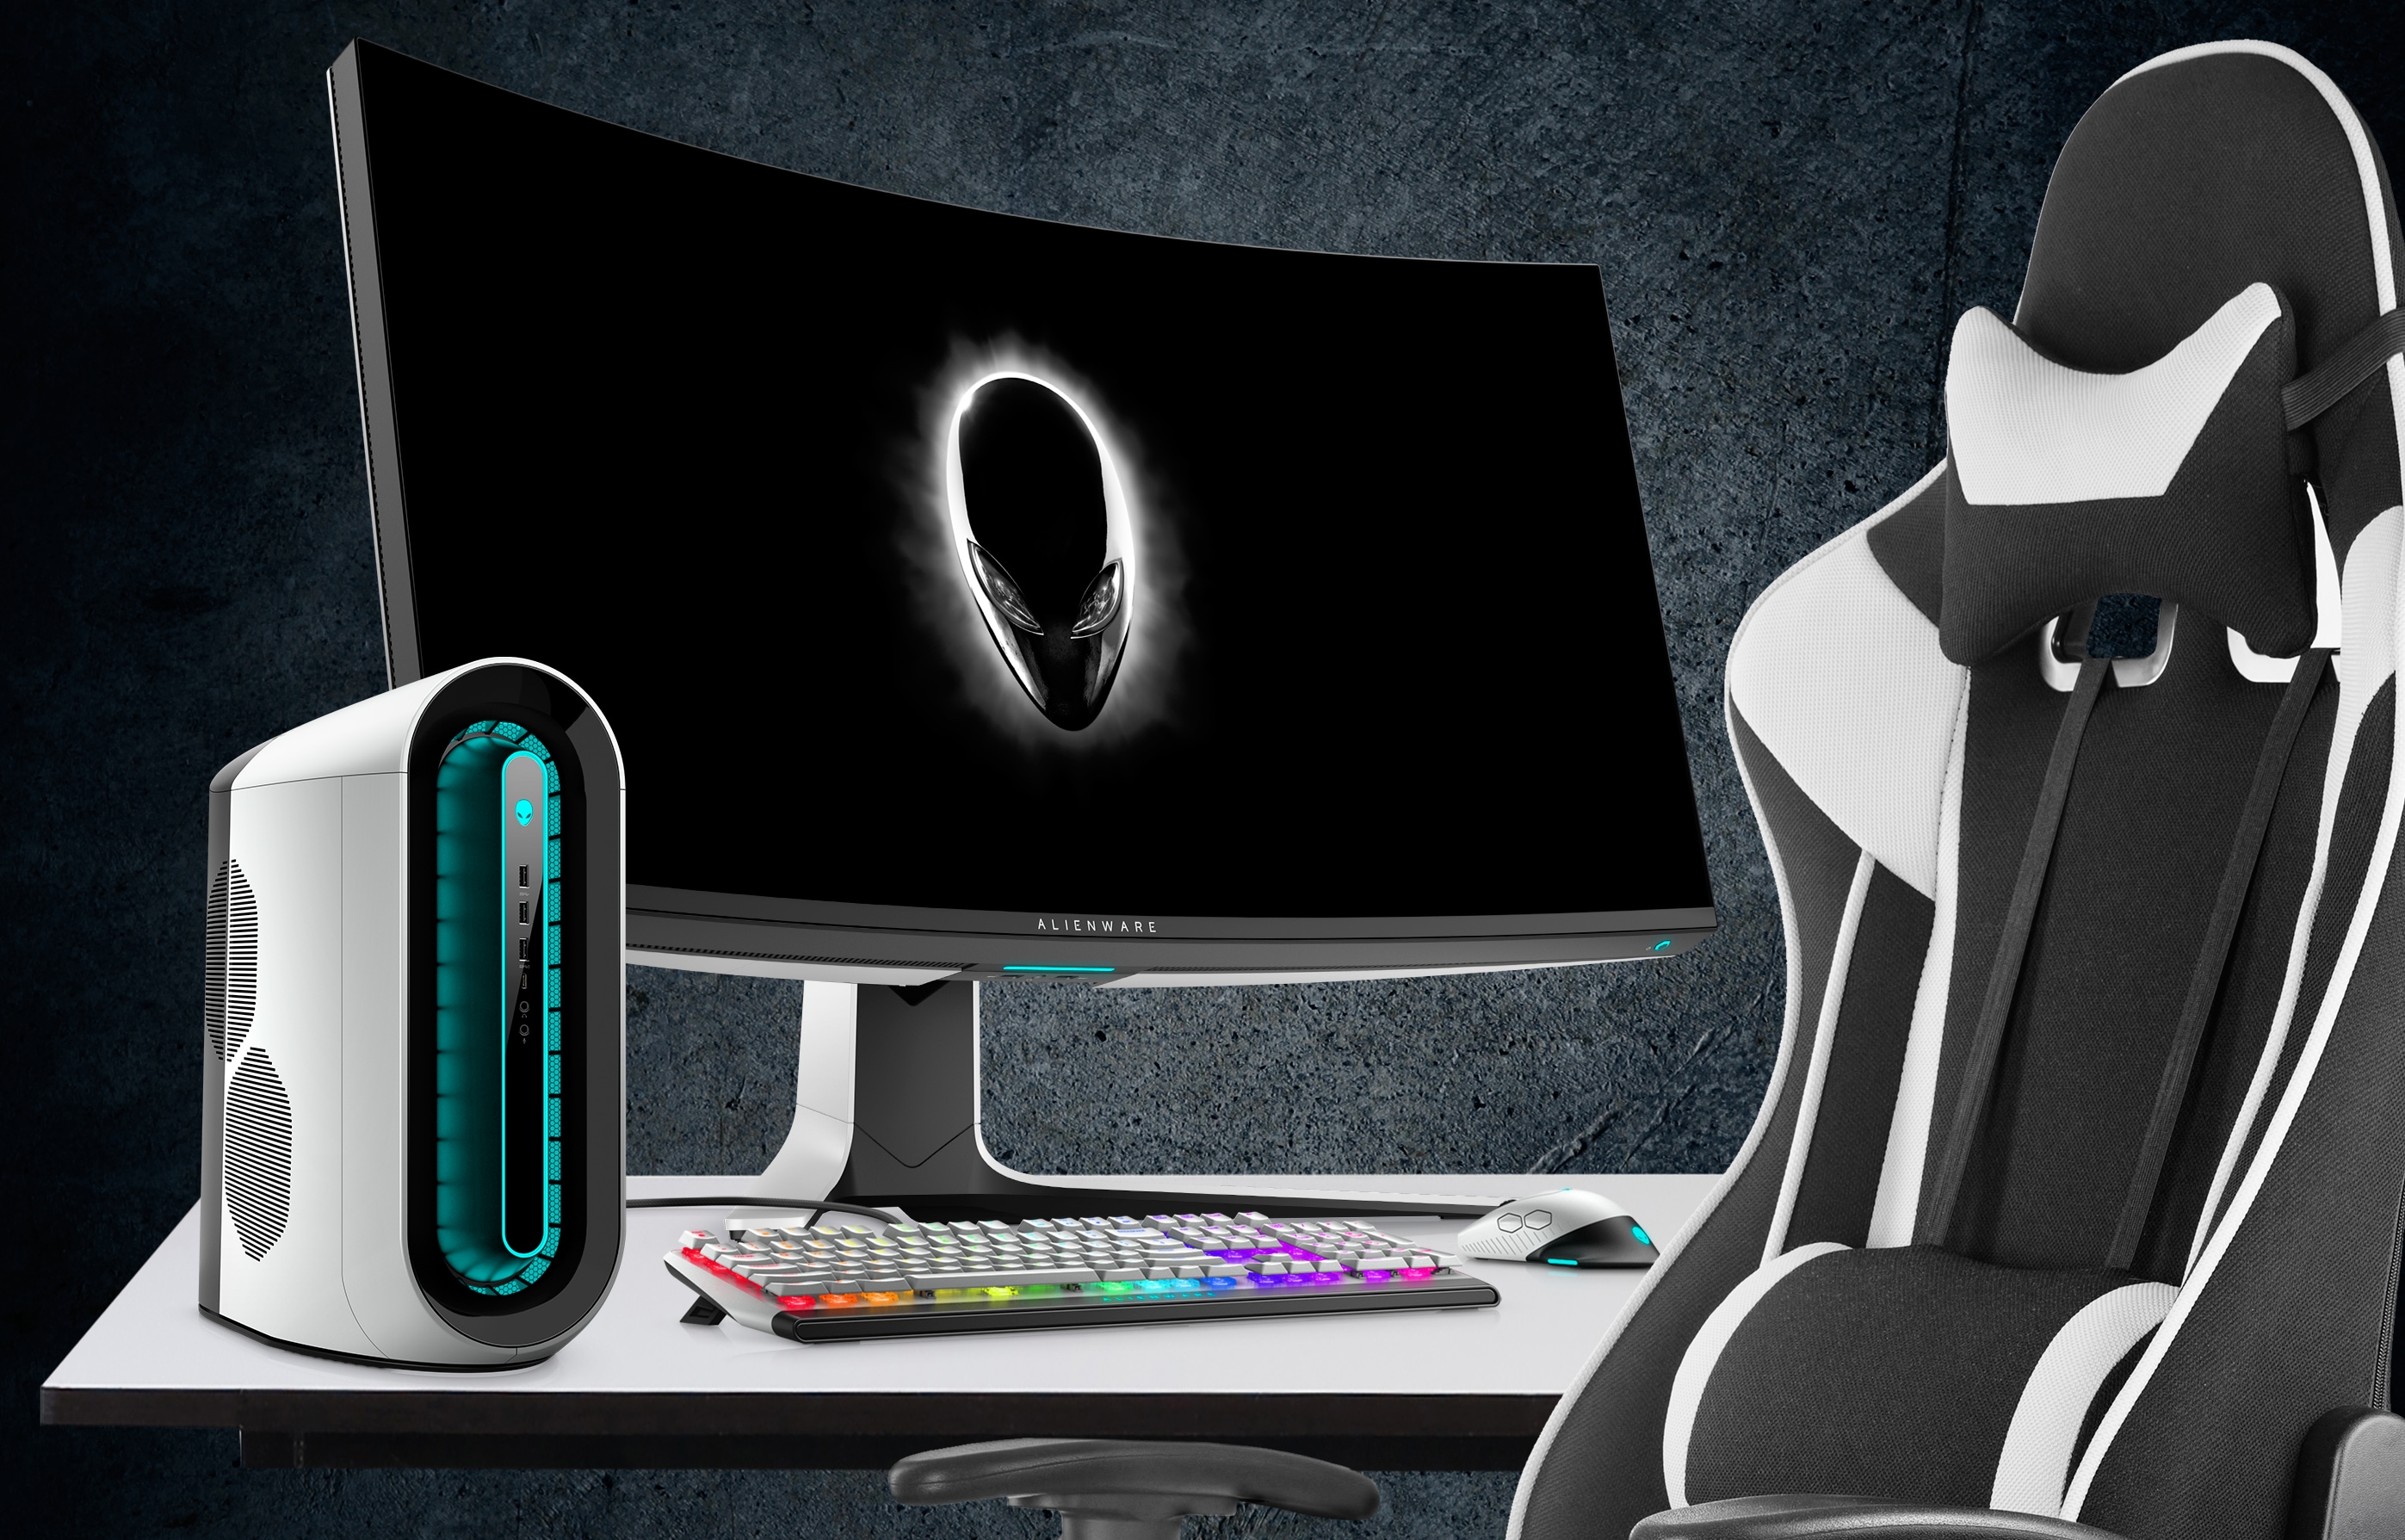 https://i.dell.com/is/image/DellContent//content/dam/ss2/product-images/page/search-creative-images/body-images/gaming-monitor-144hz-dell-scp.png